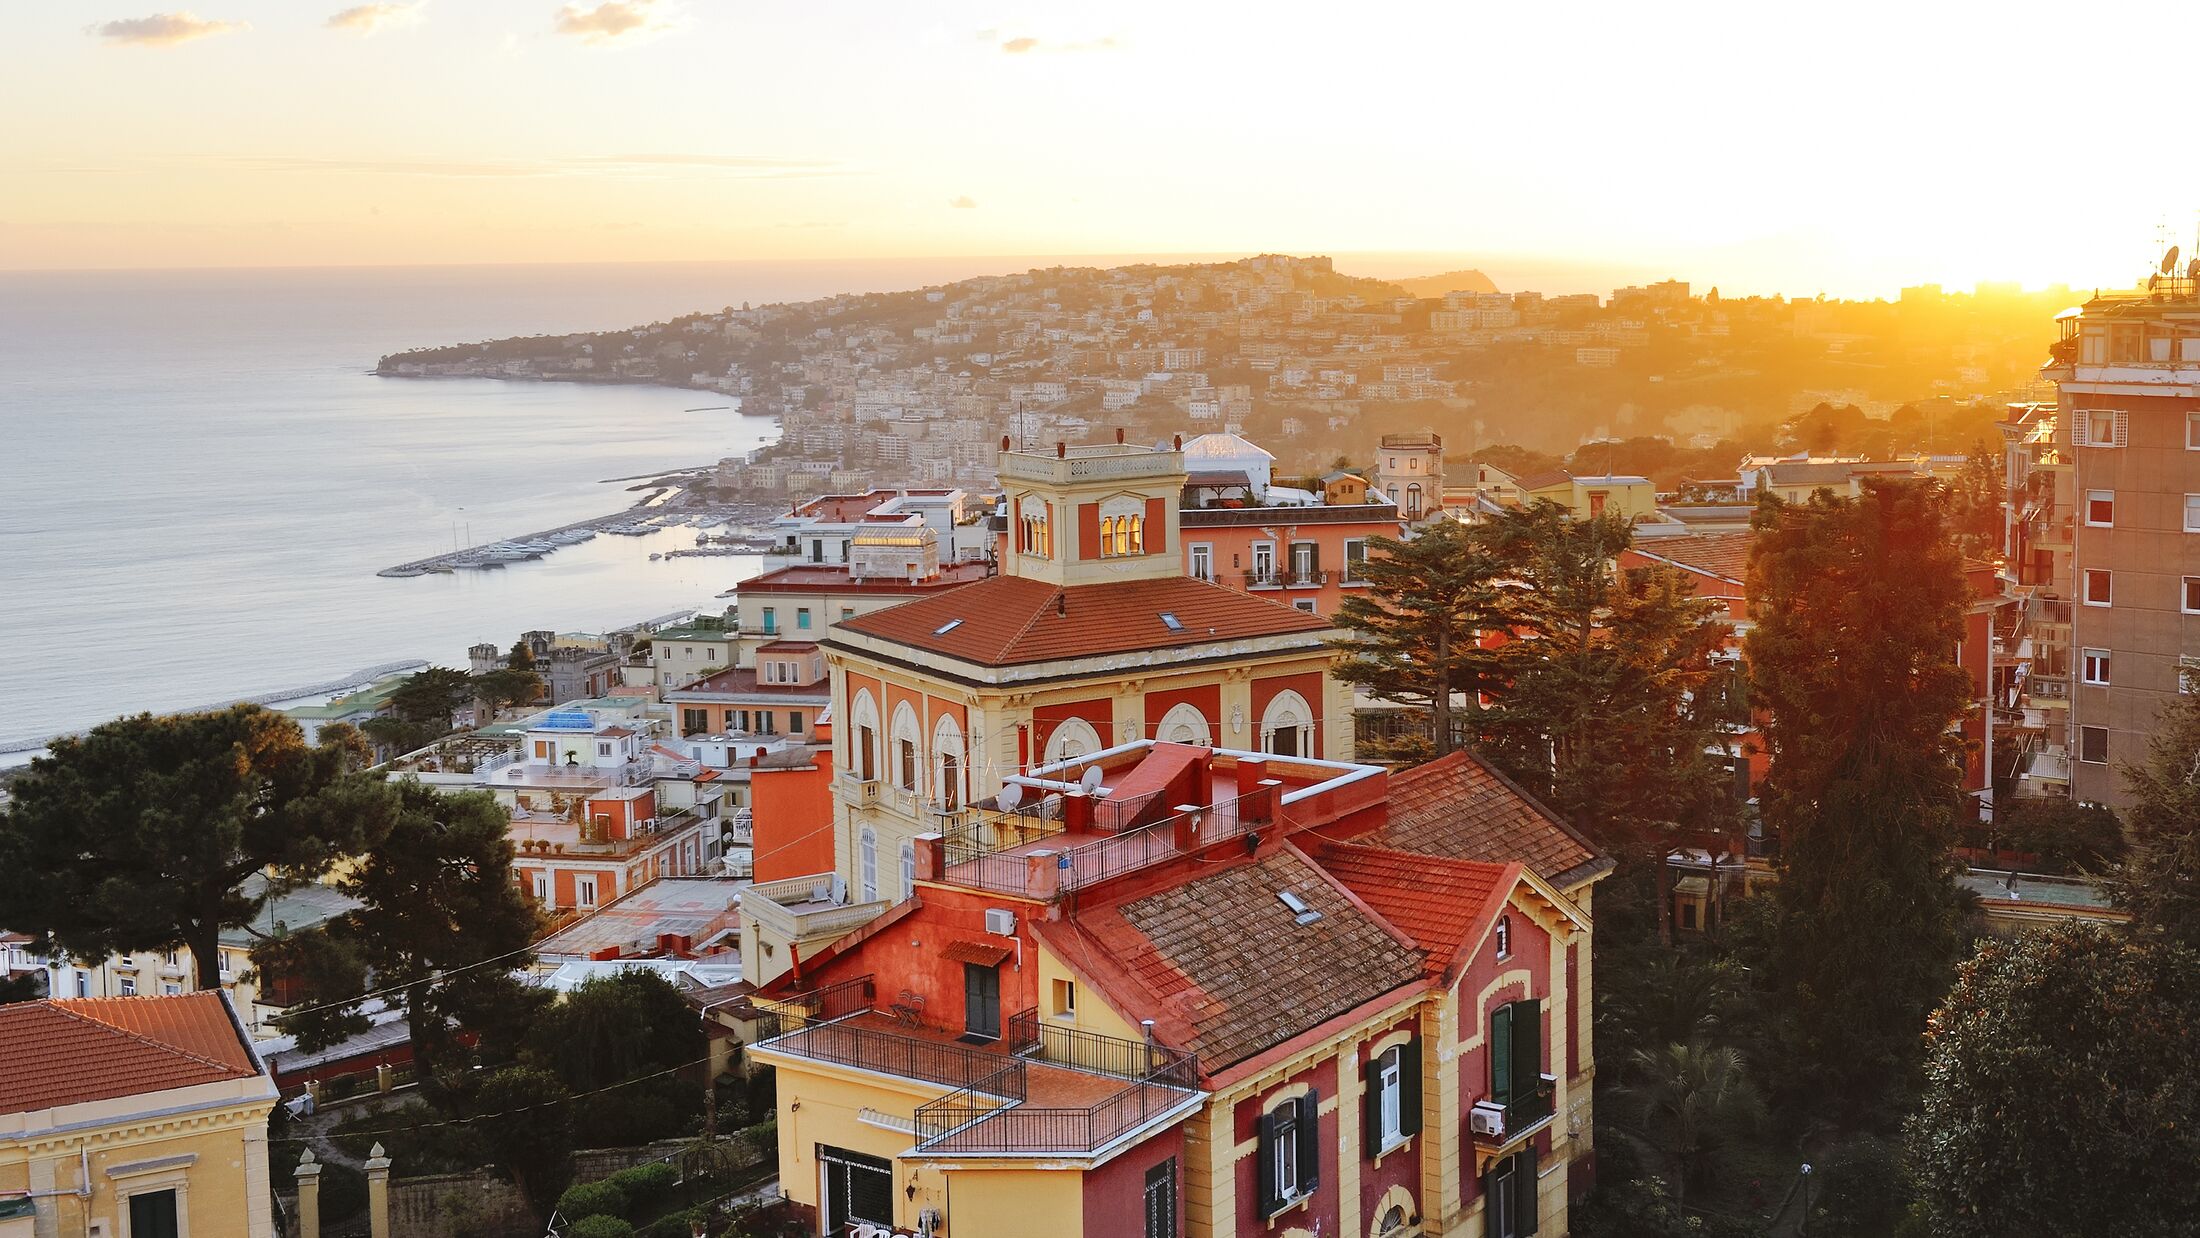 Naples panoramic view of Posillipo hill at sunset, Italy